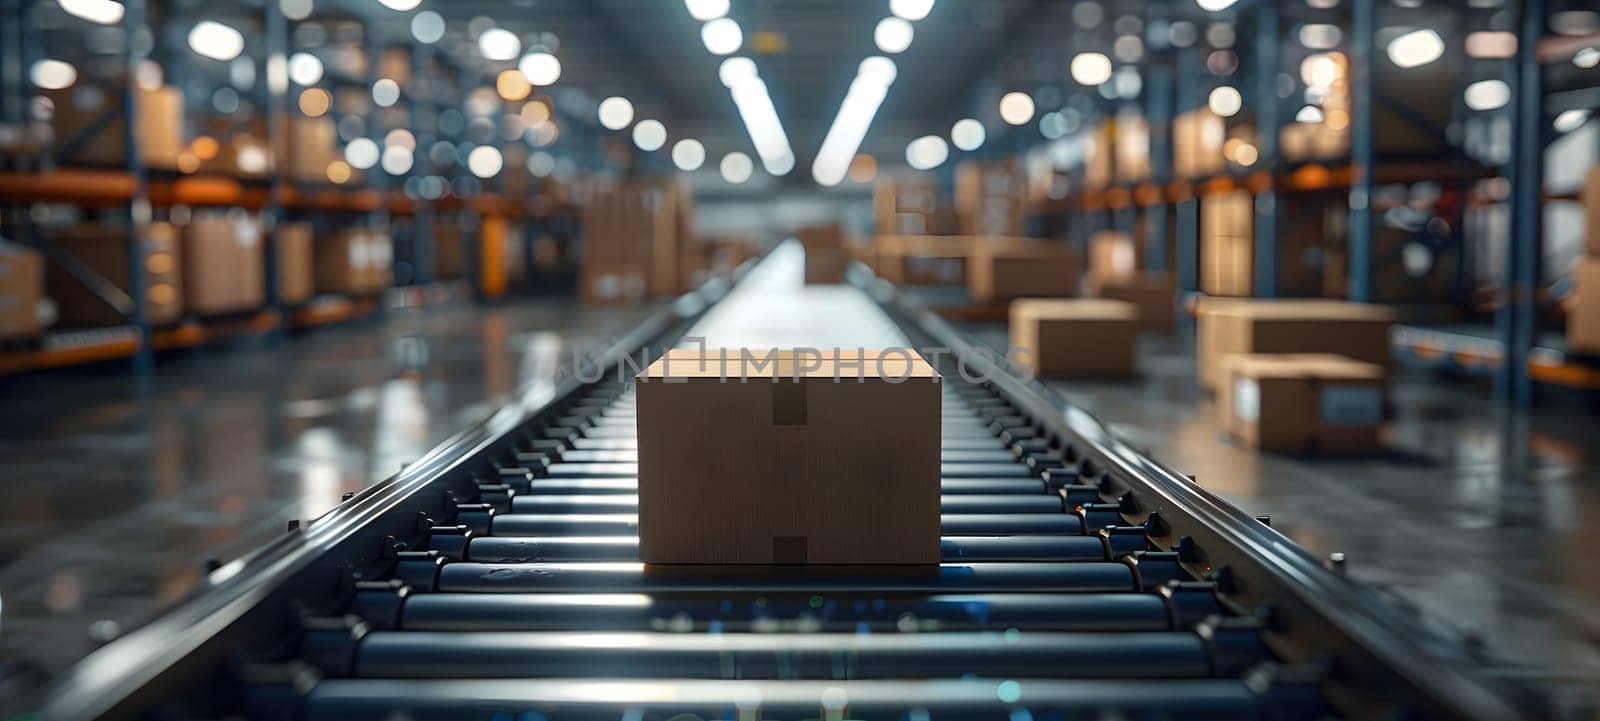 A box sits on a conveyor belt in a warehouse building by Nadtochiy